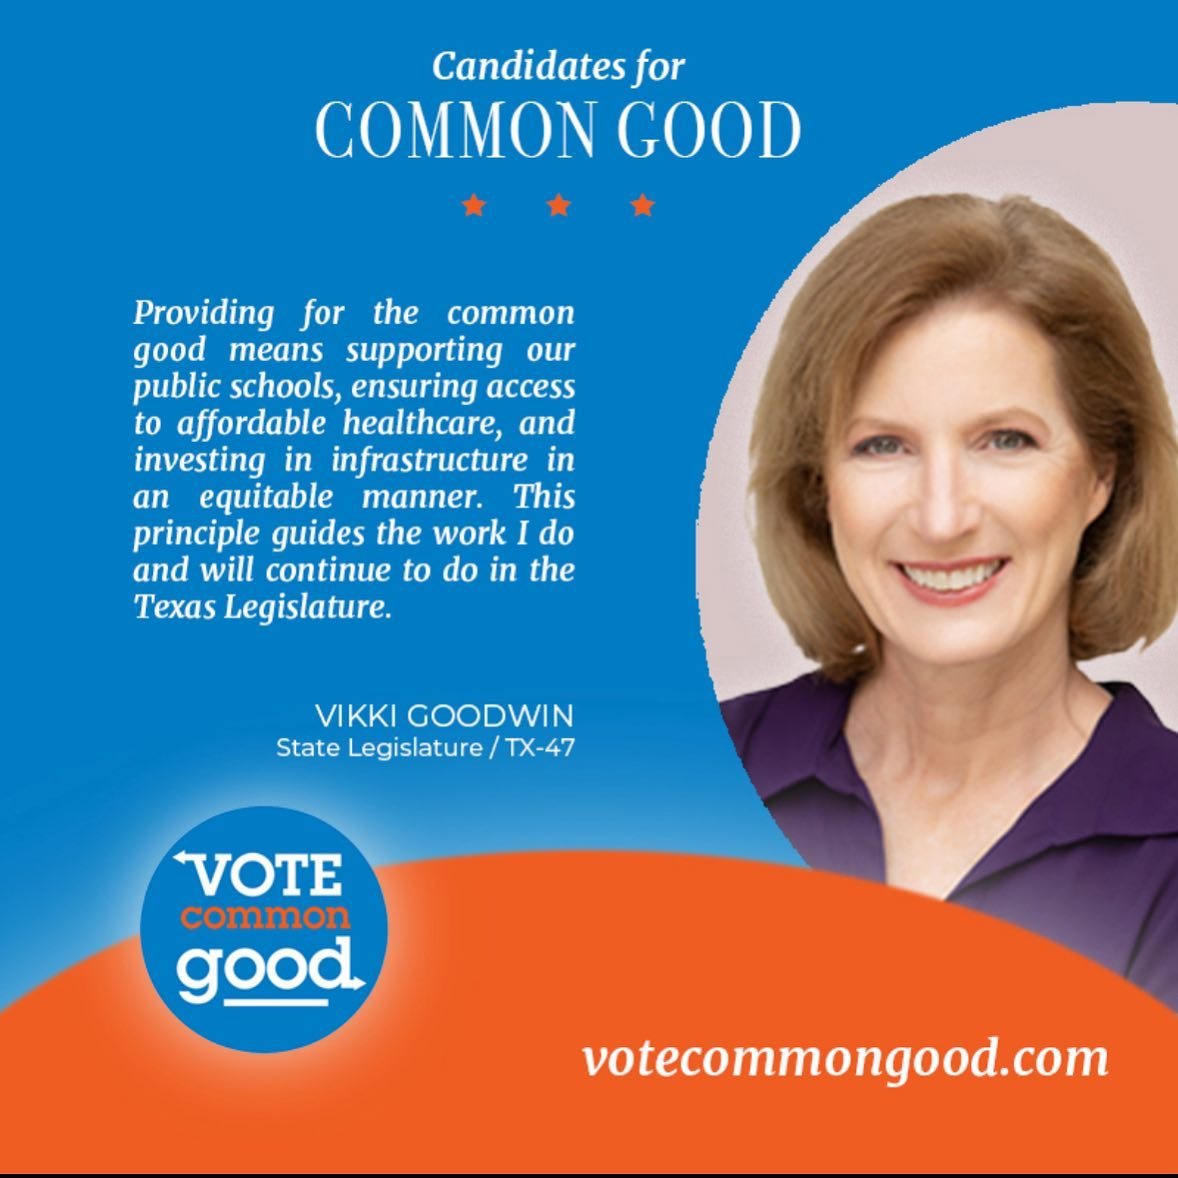 Honored to receive the @votecommongood endorsement. Setting aside differences, we can stand up for the things that matter to everyone: strong public schools, quality healthcare, and affordability.